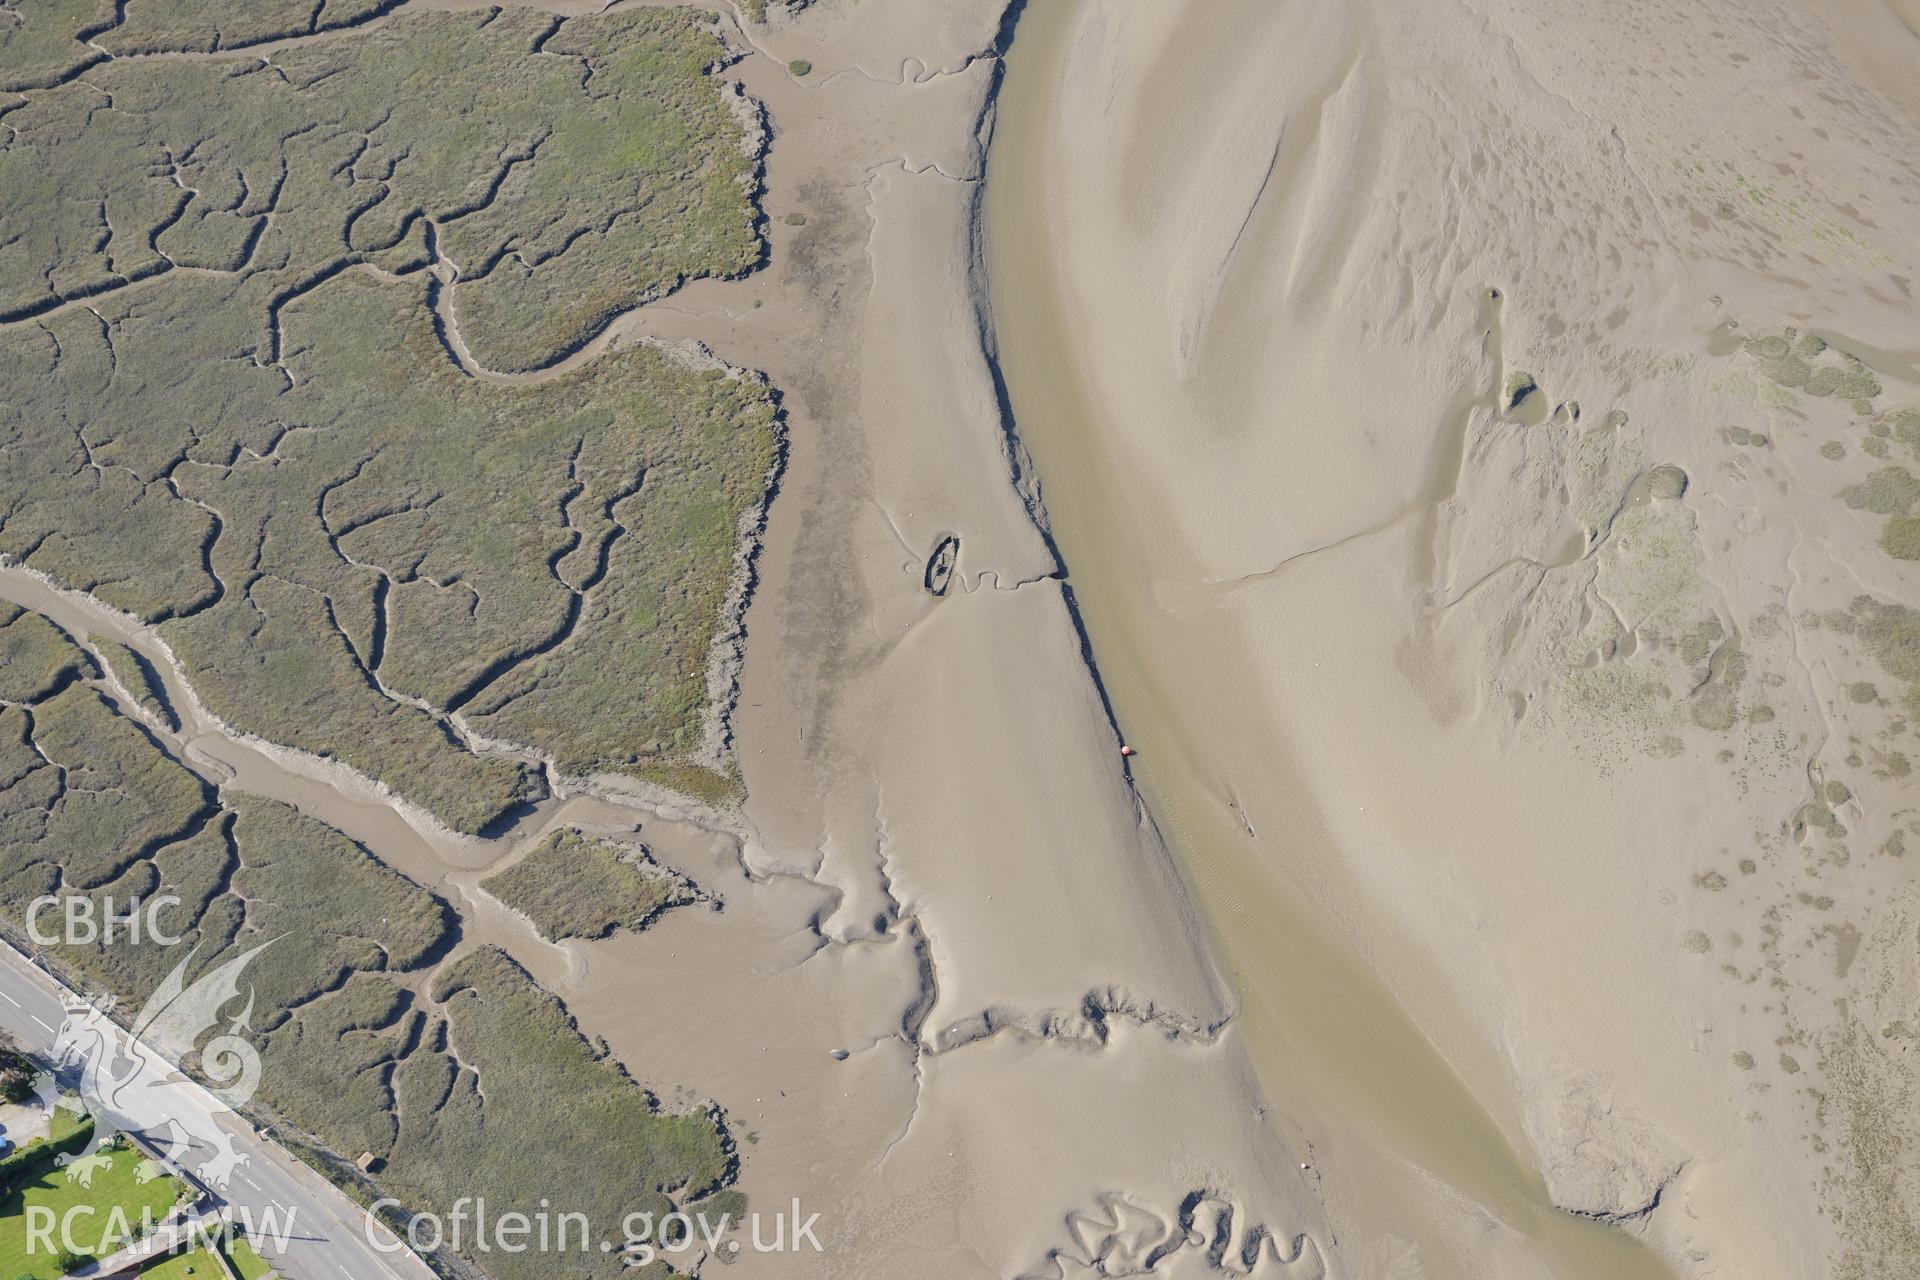 Hull or wreck off the northern coast of the Gower Peninsula, near Penclawdd. Oblique aerial photograph taken during the Royal Commission's programme of archaeological aerial reconnaissance by Toby Driver on 30th September 2015.